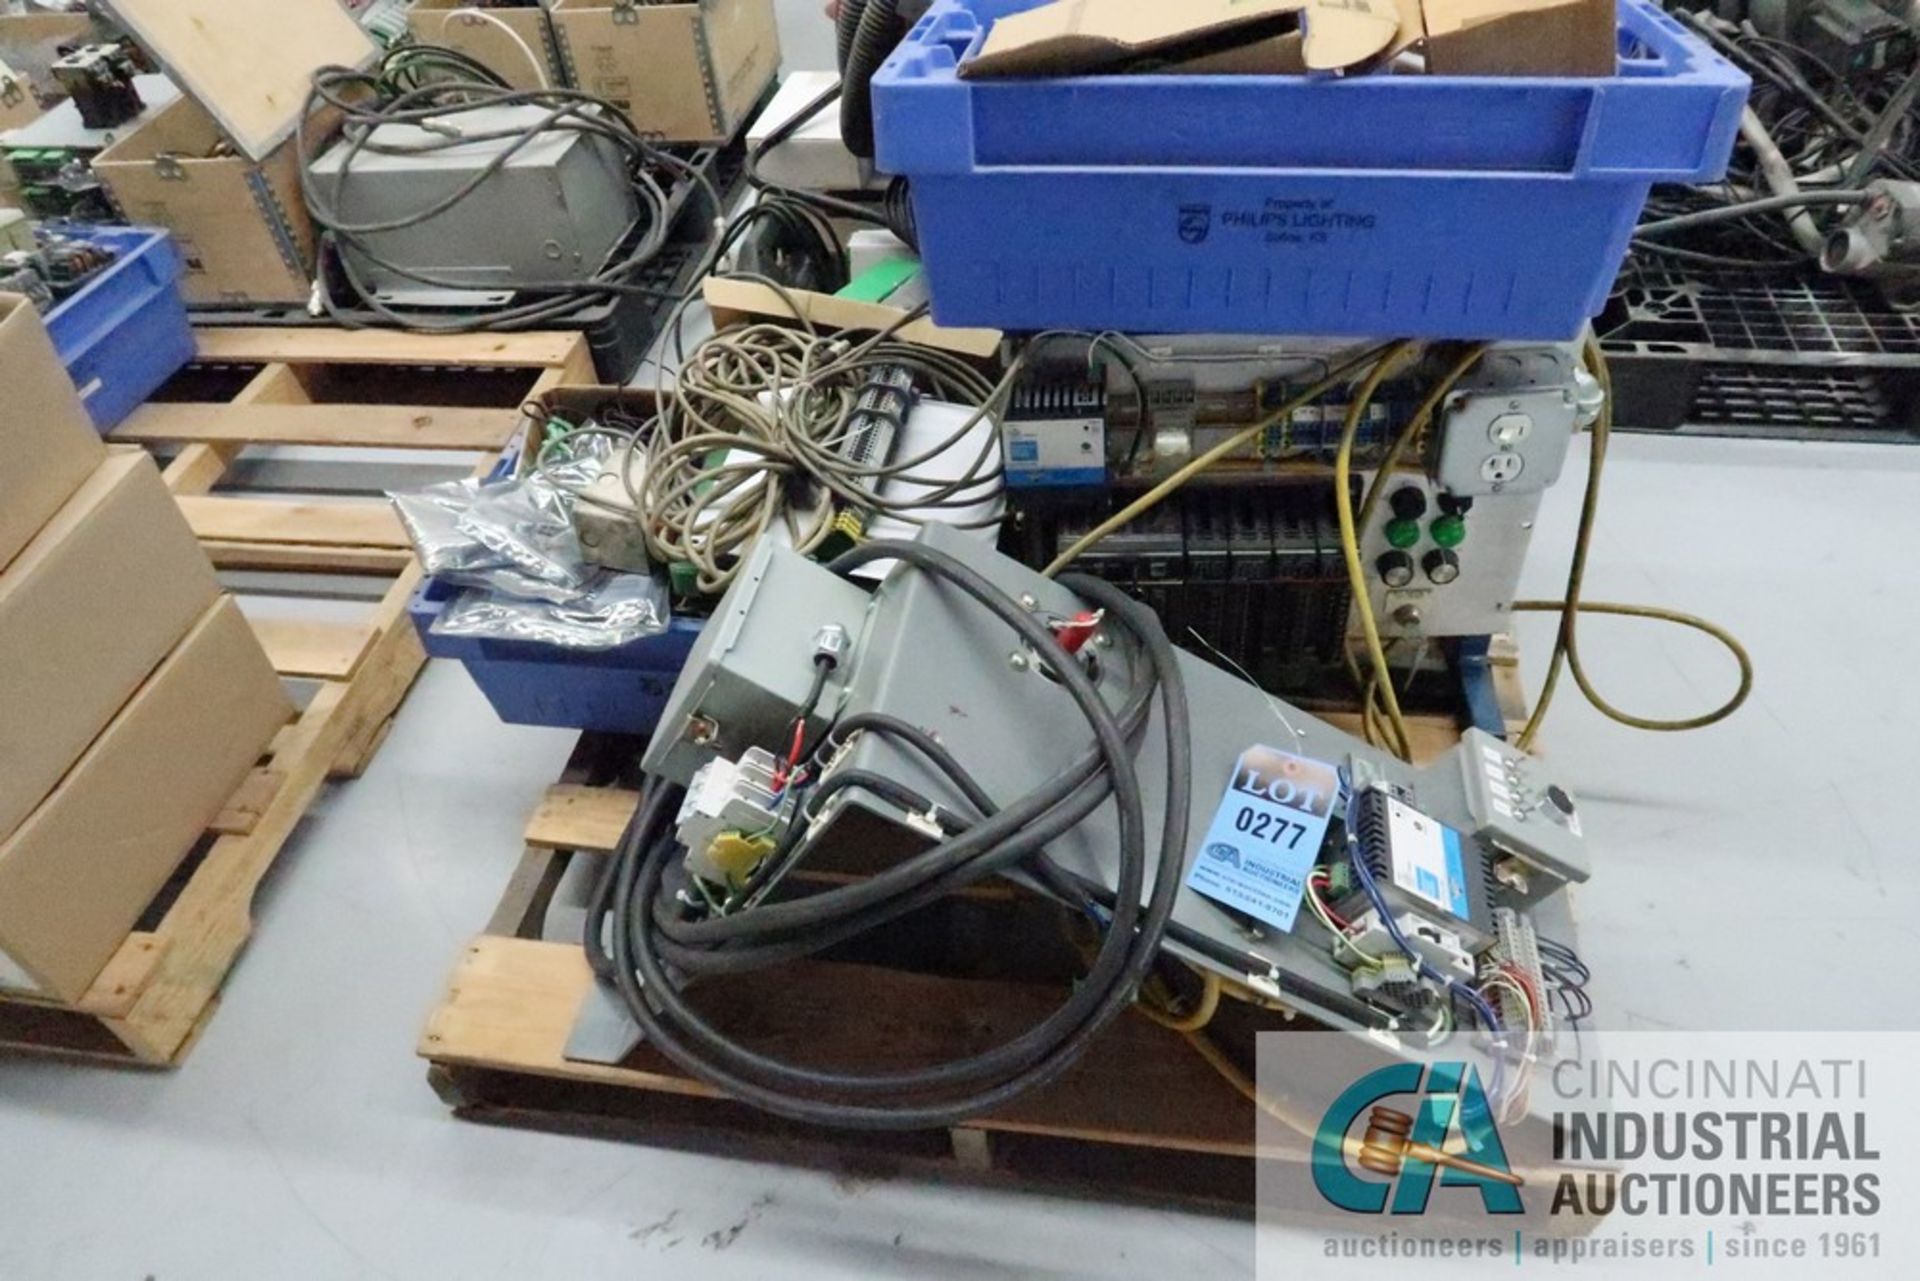 (LOT) (4) SKIDS MISC. ELECTRONIC BOARDS, SERVO MOTORS, MODULES, INVERTERS, POWER SUPPLIES - Image 2 of 13